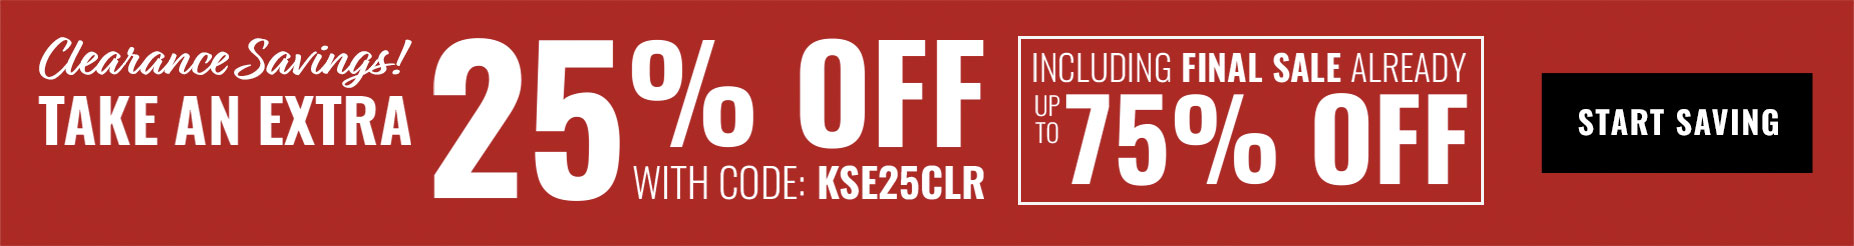 Clearance Savings! Take an extra 25% off with code: KSE25CLR